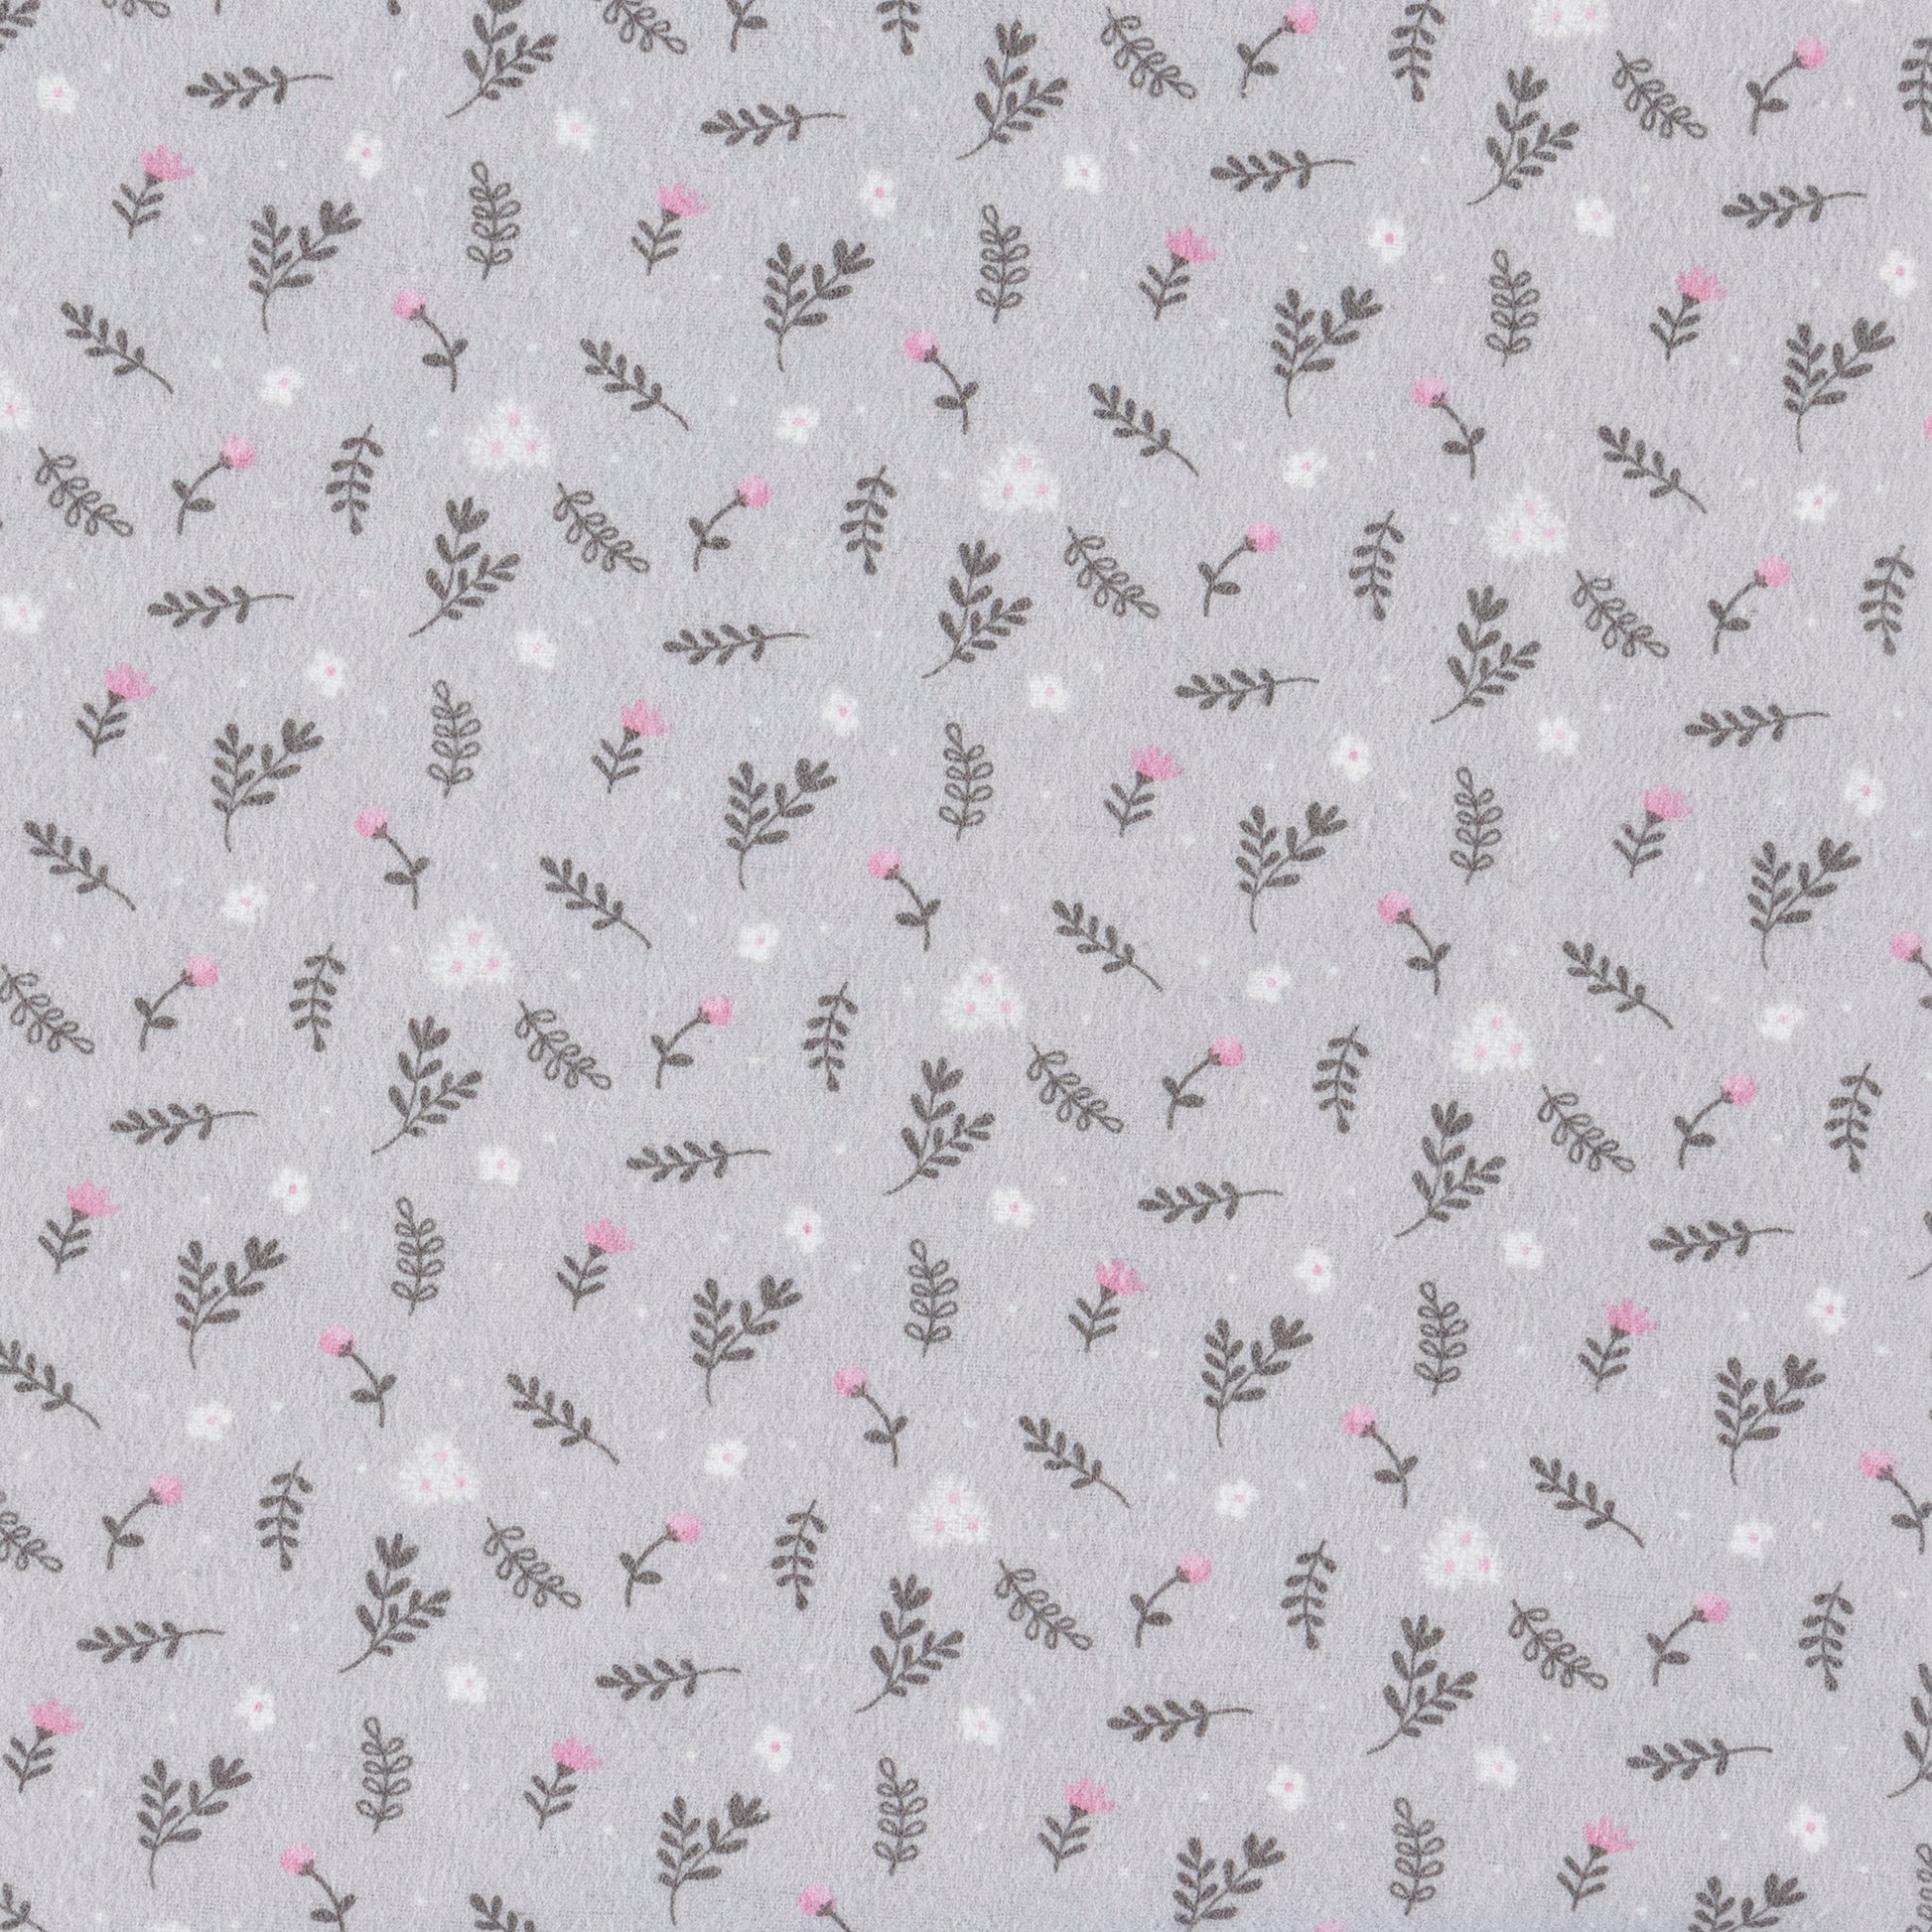 Baby on Gray Plaid Deluxe Flannel Fitted Crib Sheet - swatch view